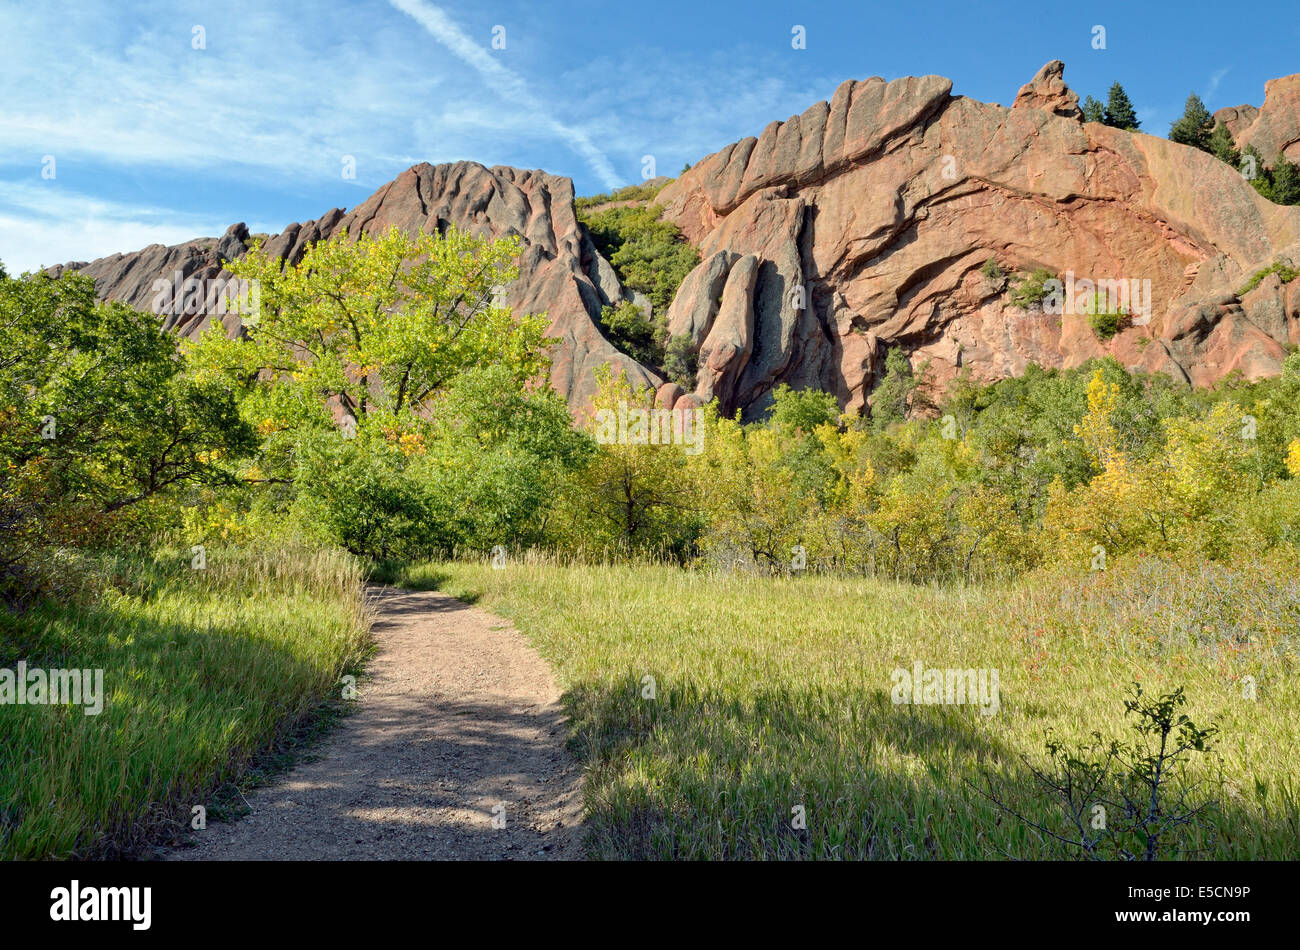 Red sandstone formation, Fountain Valley Trail, Boxborough State Park, Denver, Colorado, United States Stock Photo